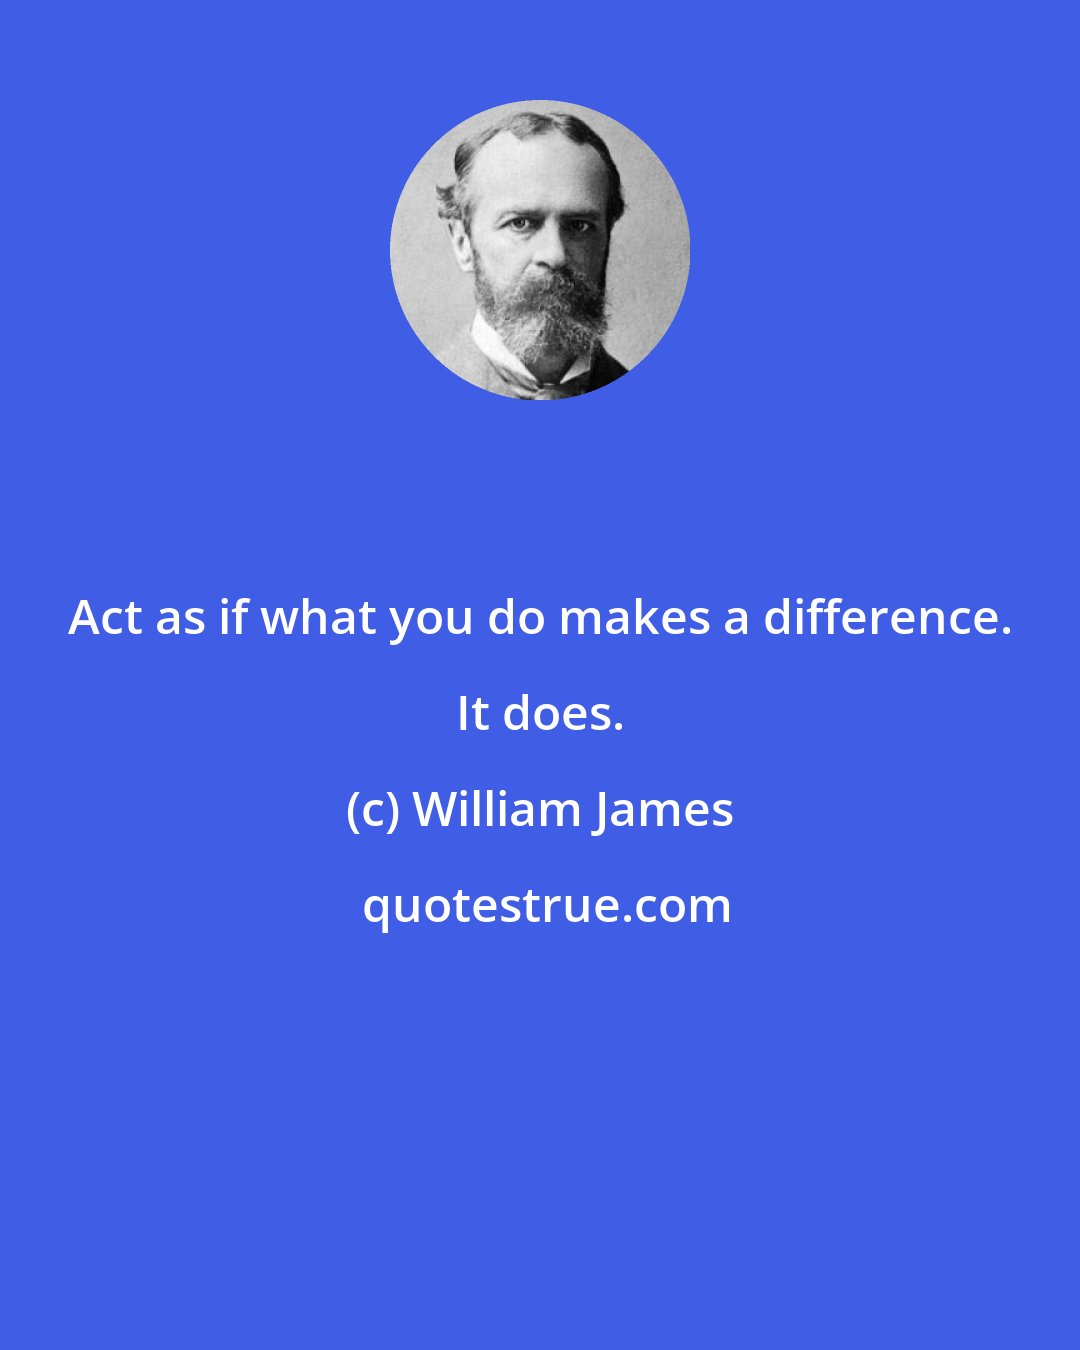 William James: Act as if what you do makes a difference. It does.